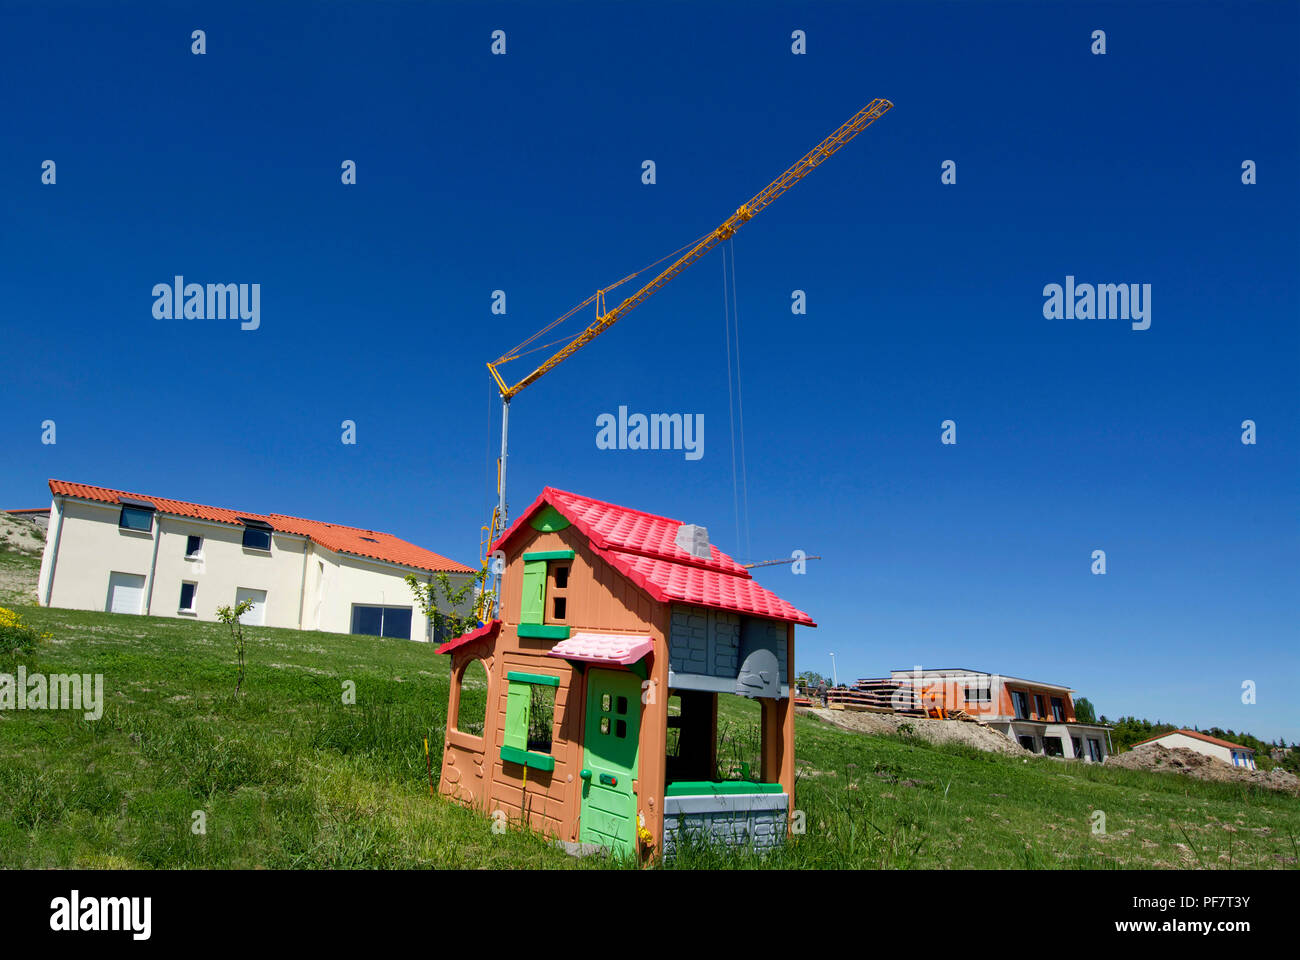 Plastic children's house on a ground with a crane and houses under construction, France Stock Photo